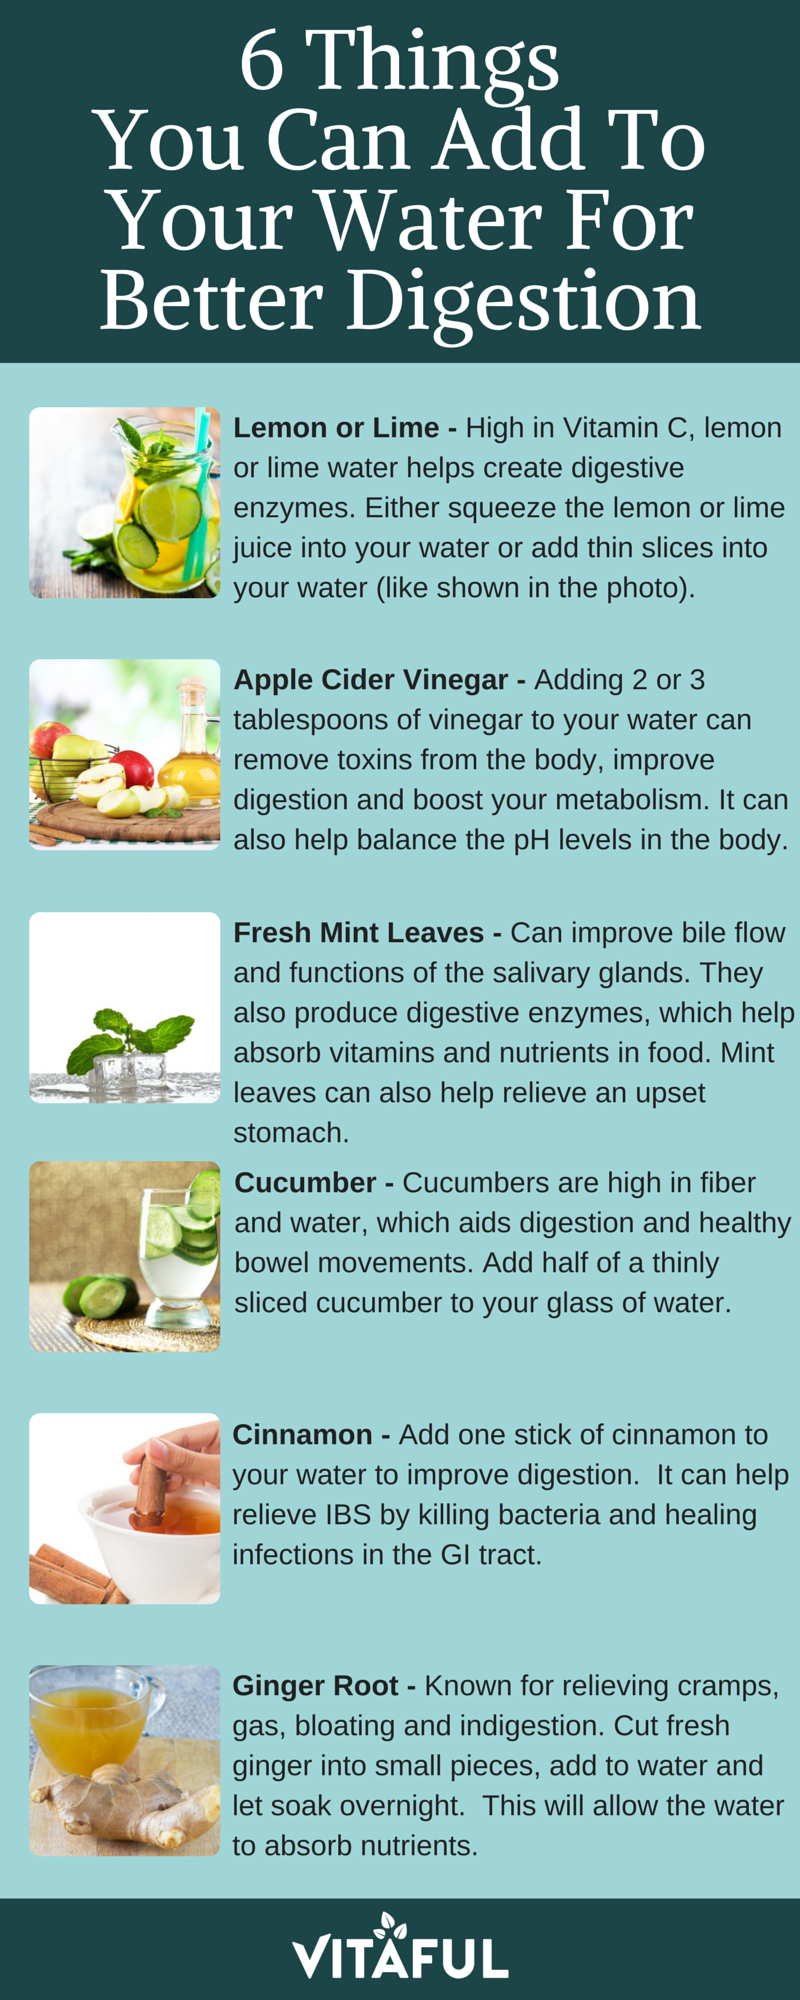 6 Ingredients You Can Add To Water For Better Digestive Health Infographic